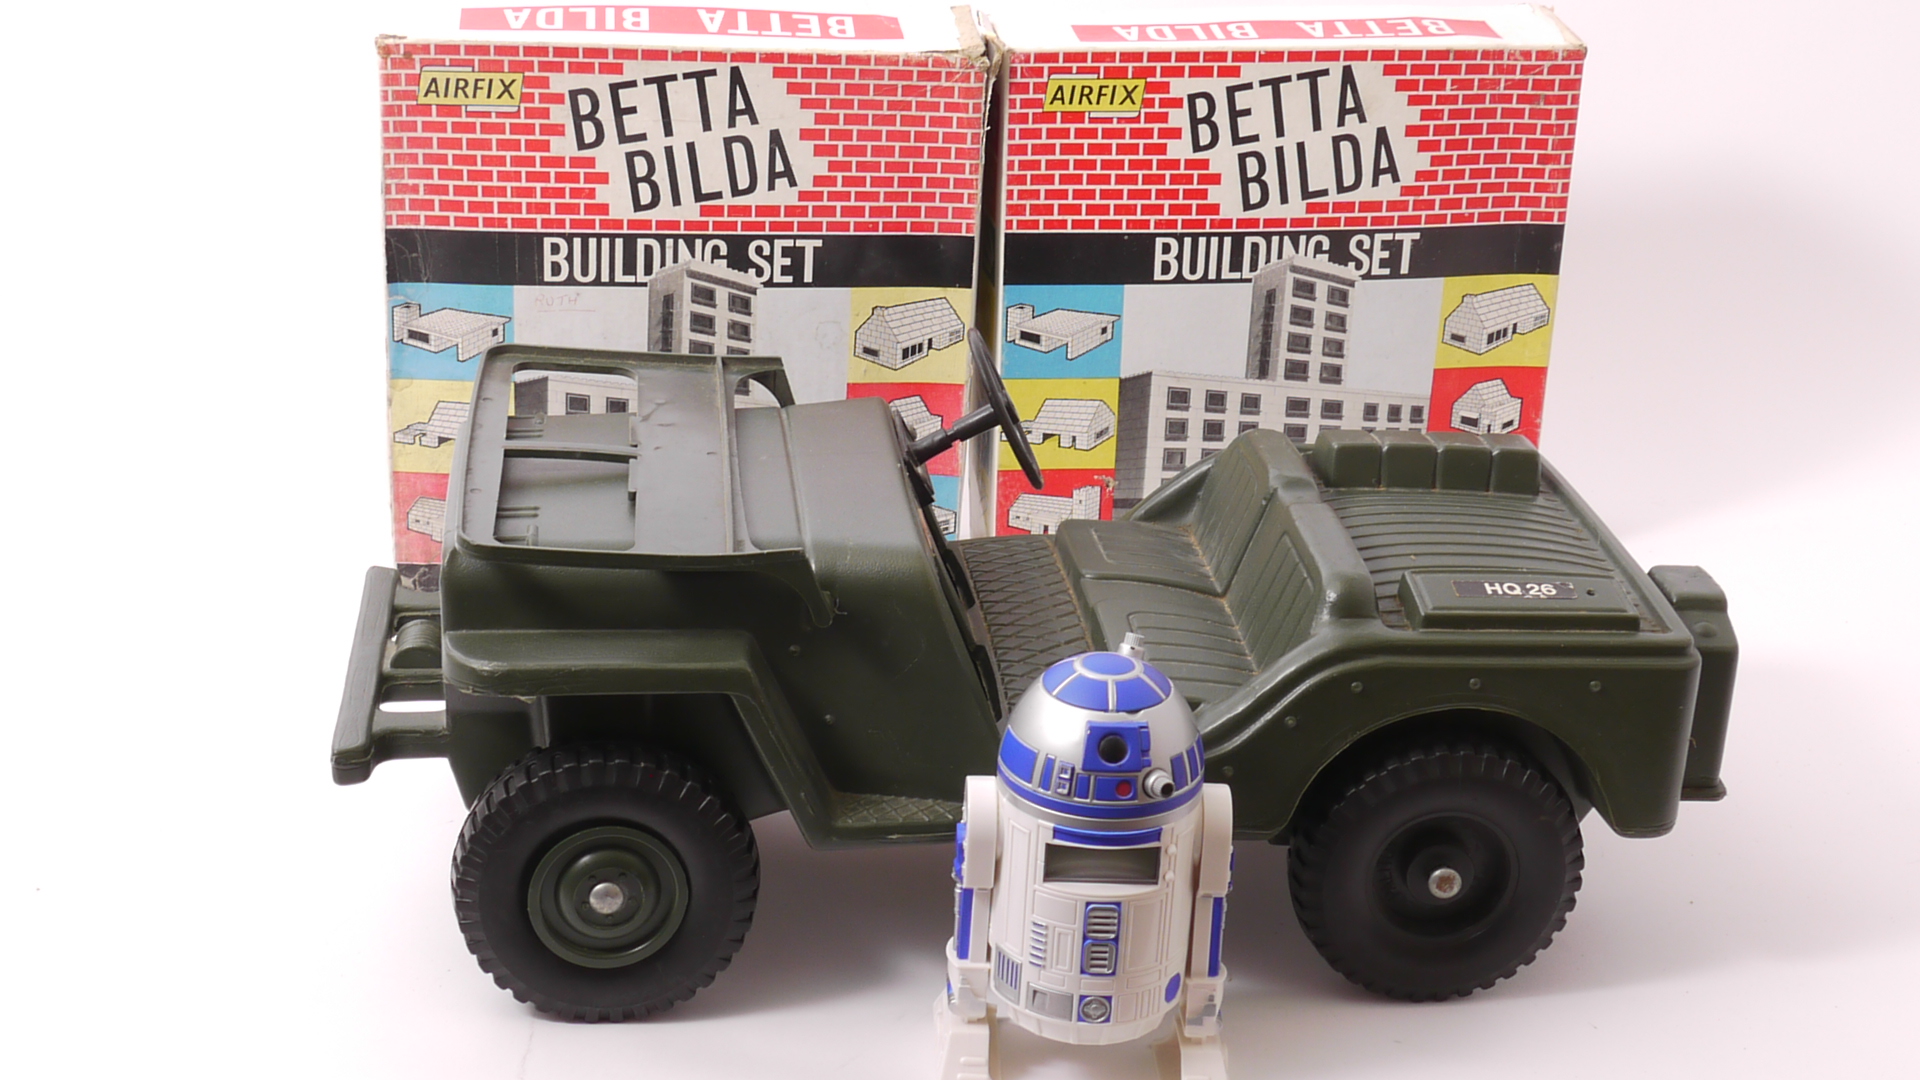 Action Man and Bettabilda, A 1975 Hasbro Action Man Jeep (steering wheel broken), together with